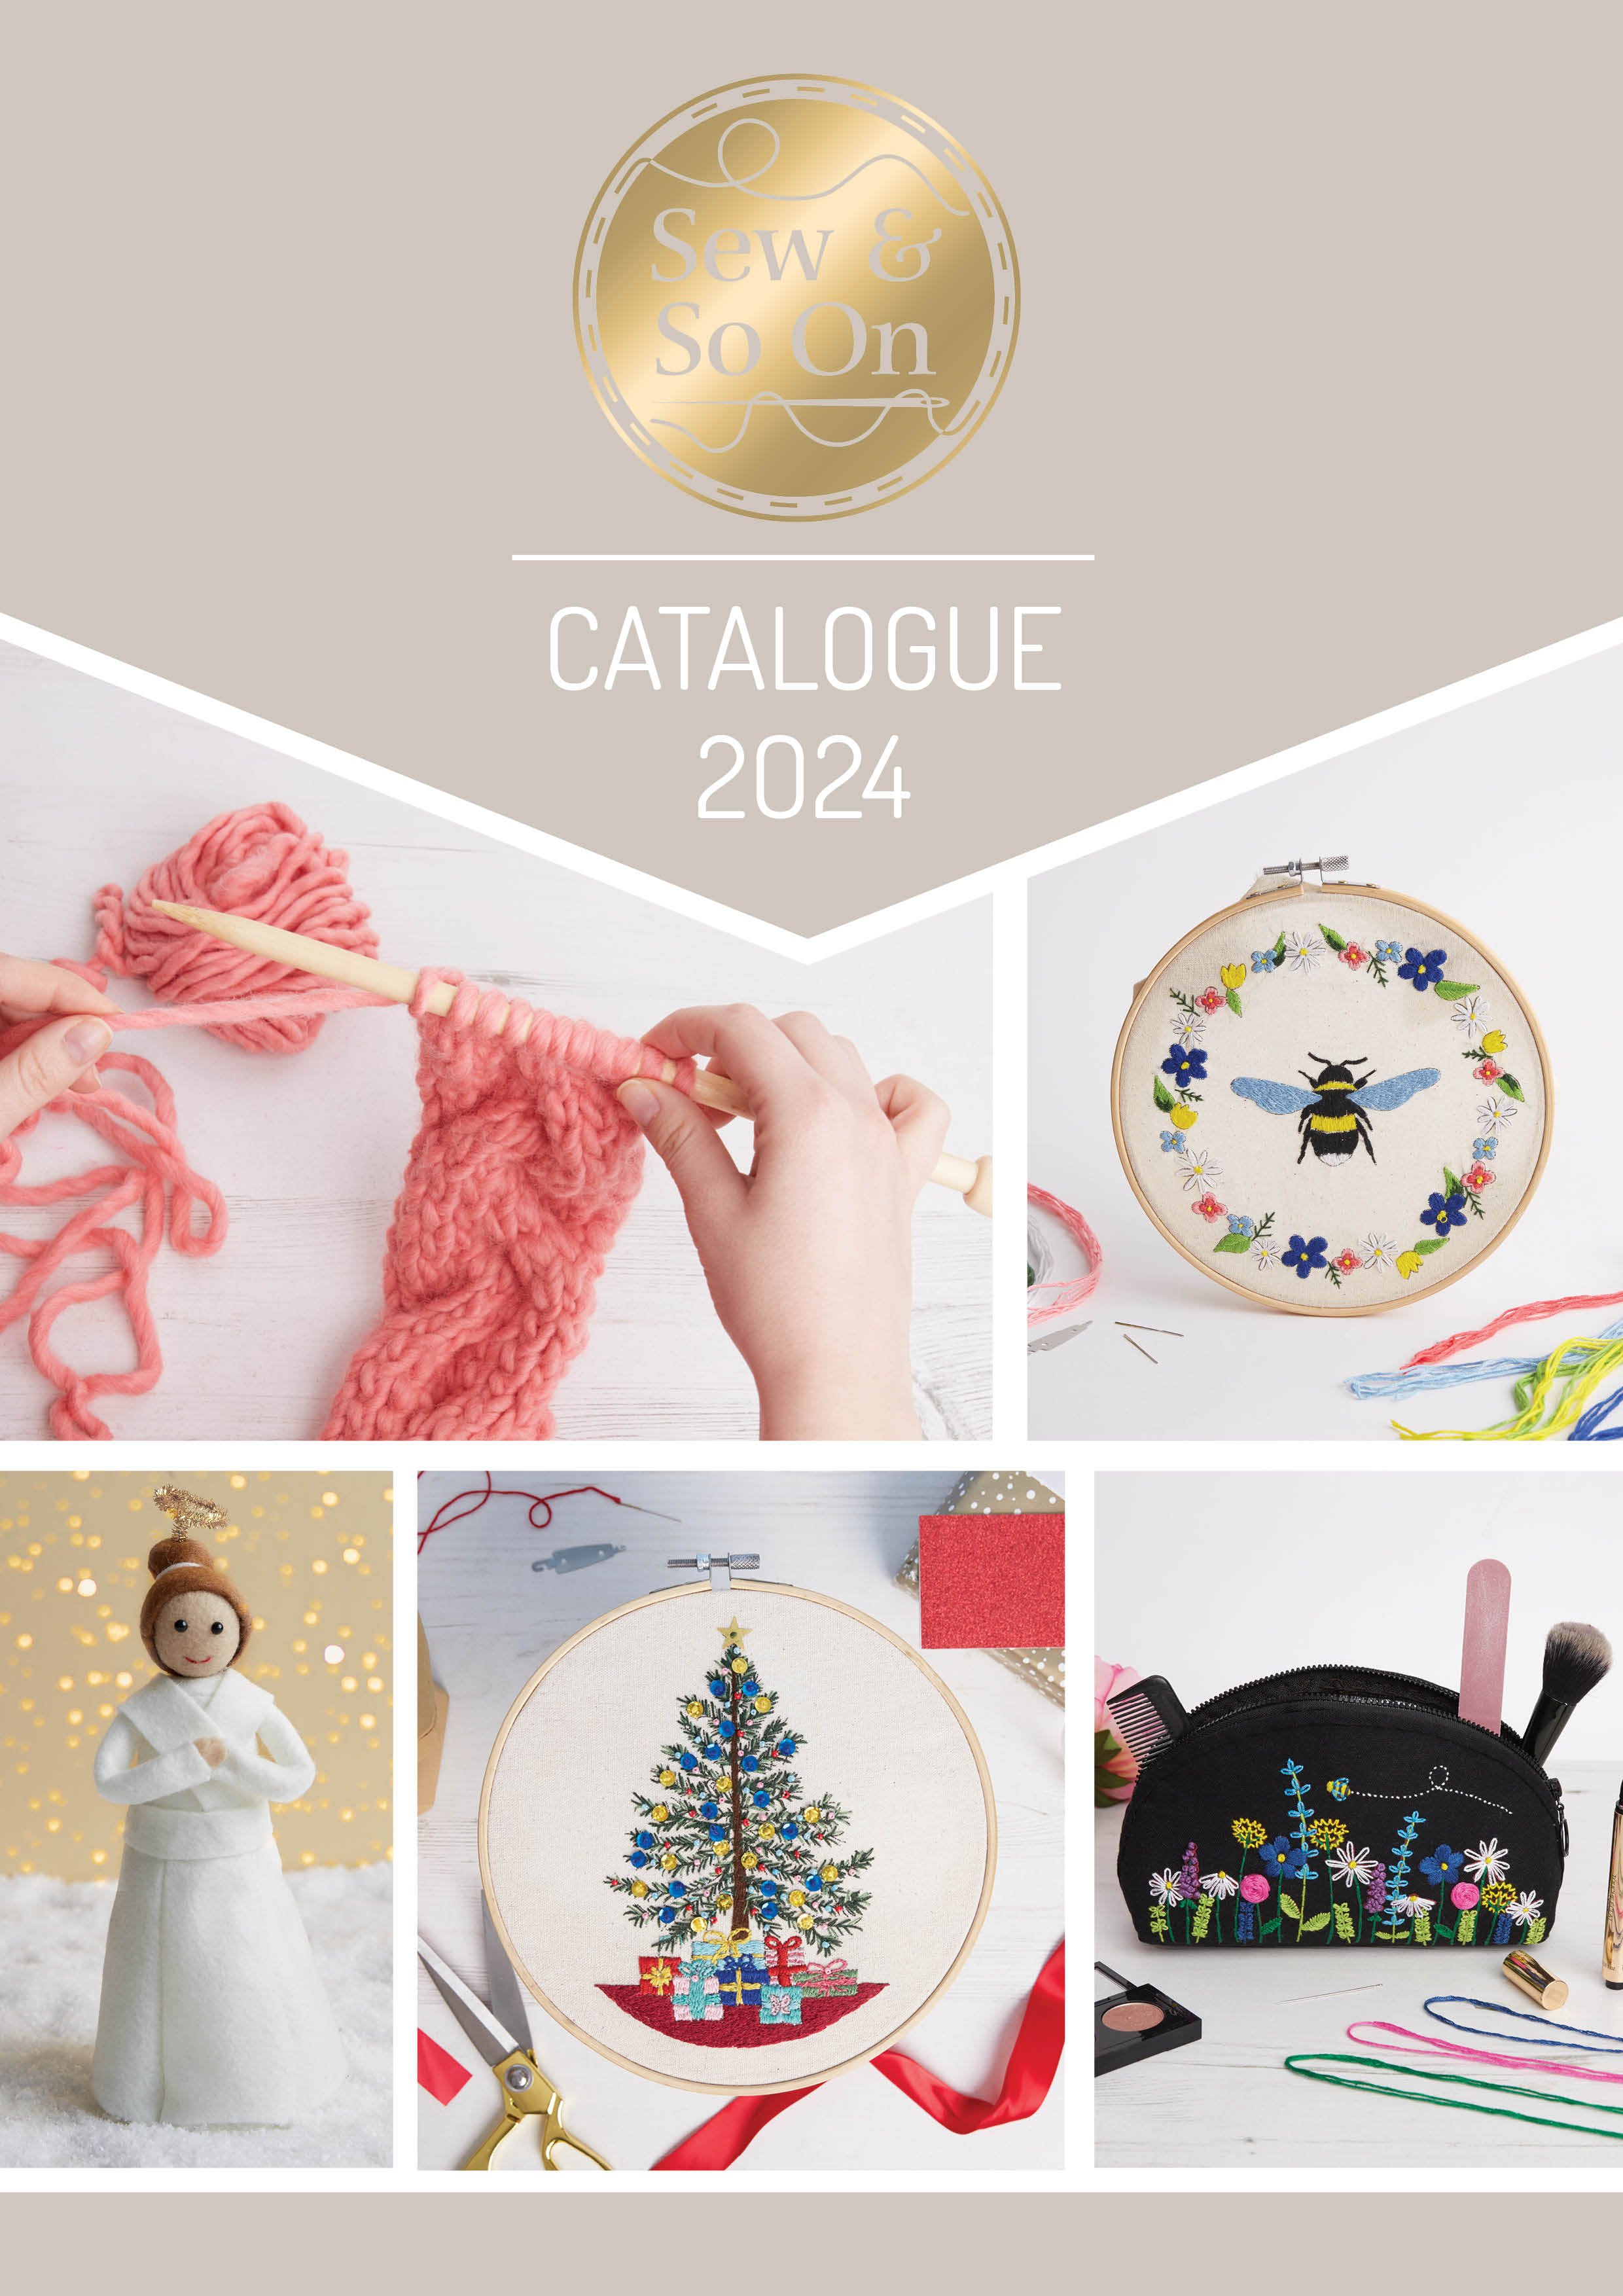 Sew and So On Brand Catalogue 2024